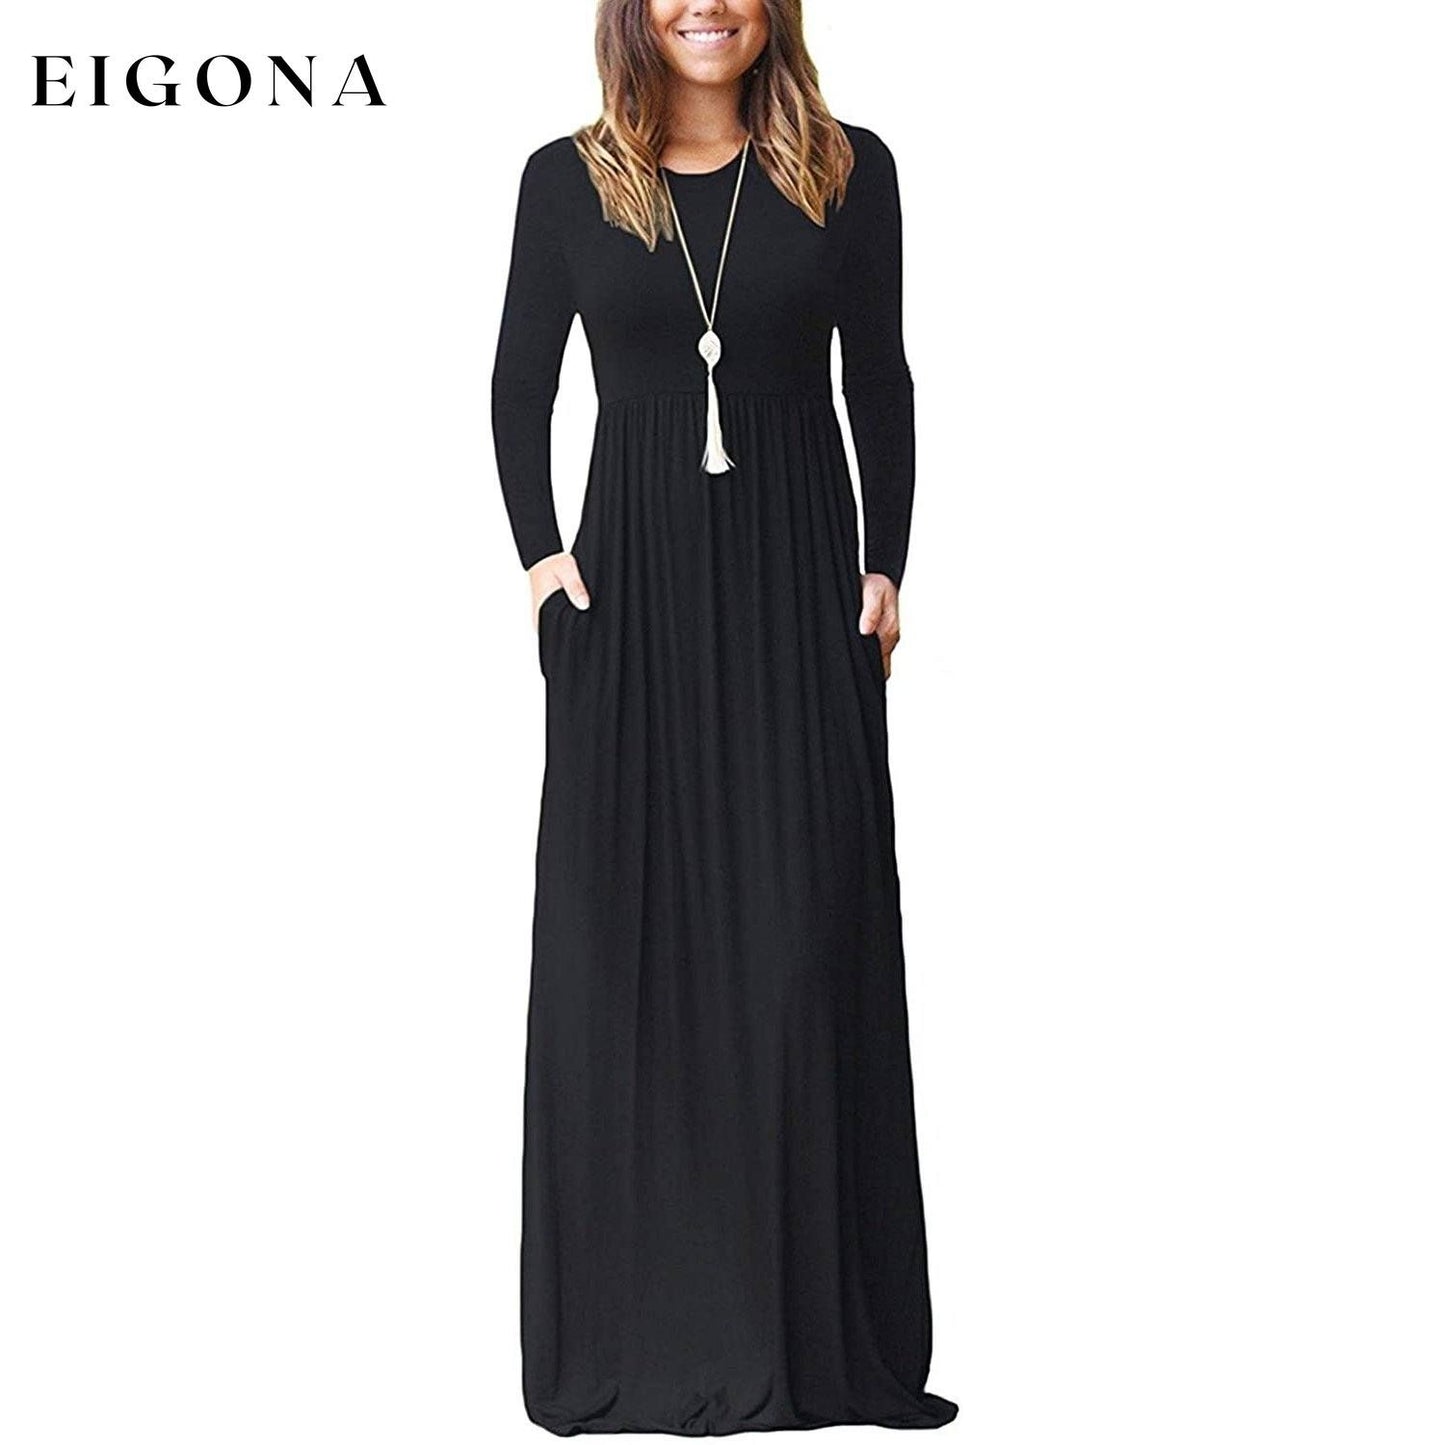 Women Long Sleeve Loose Plain Maxi Dresses Casual Long Dresses with Pockets Black __stock:500 casual dresses clothes dresses refund_fee:1200 show-color-swatches